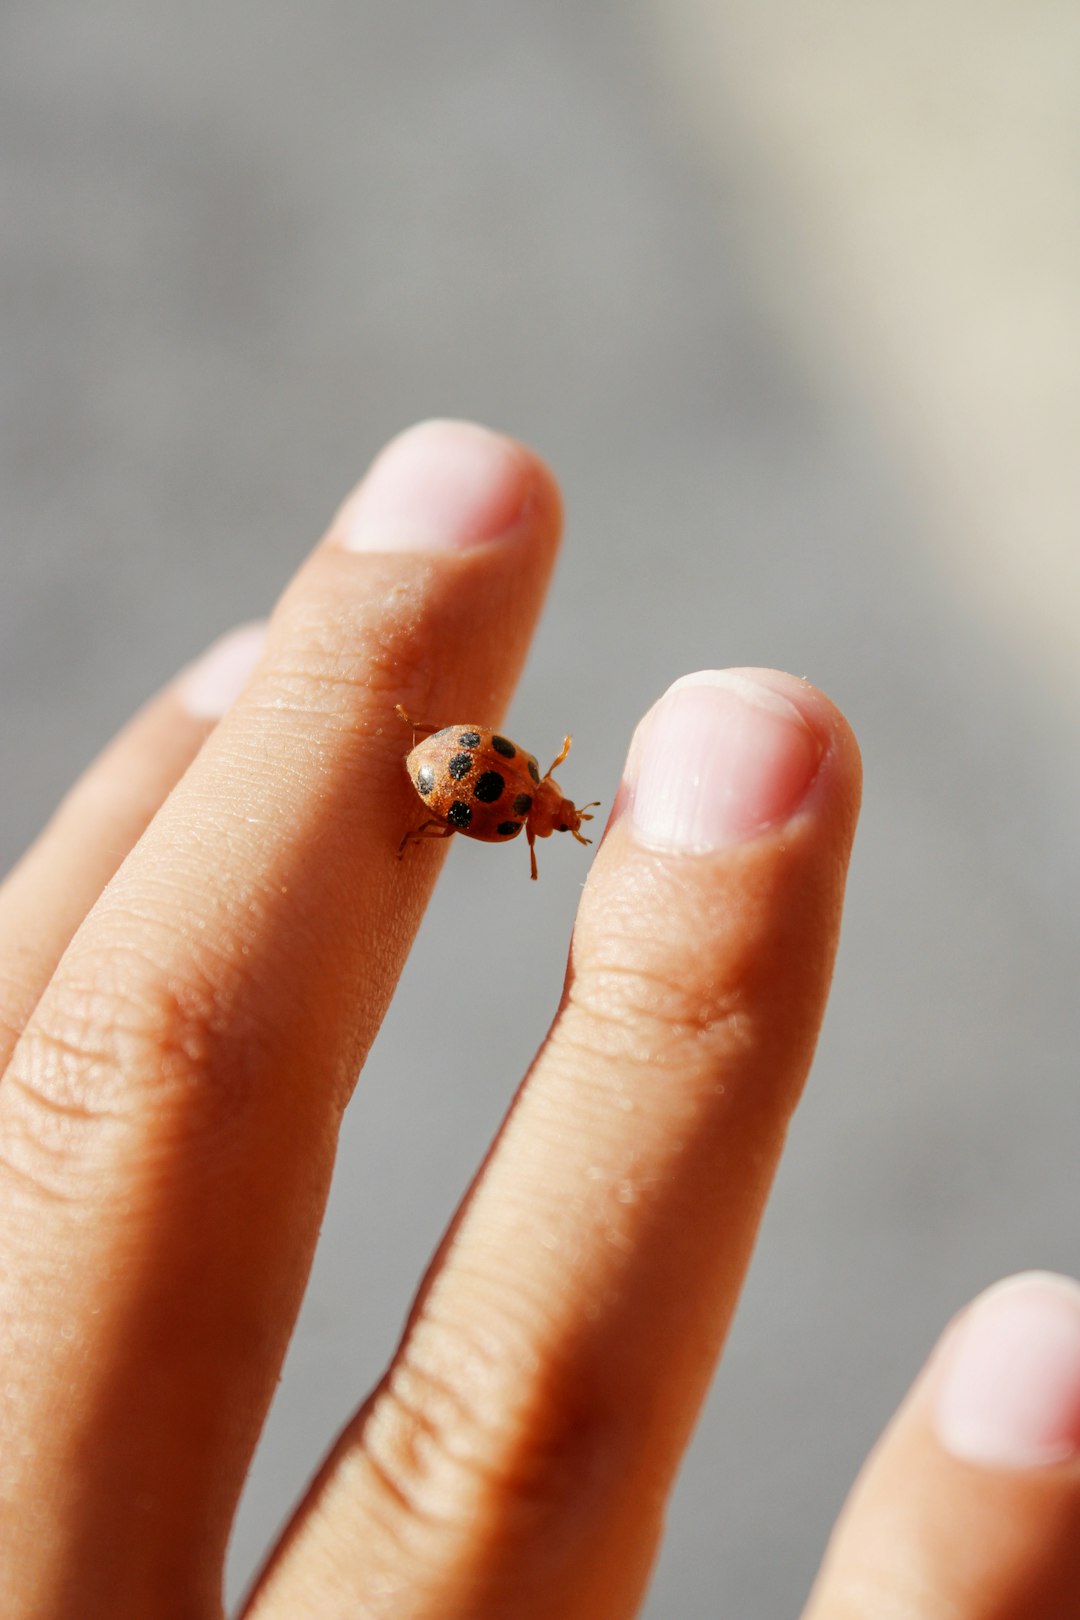 red ladybug on persons finger